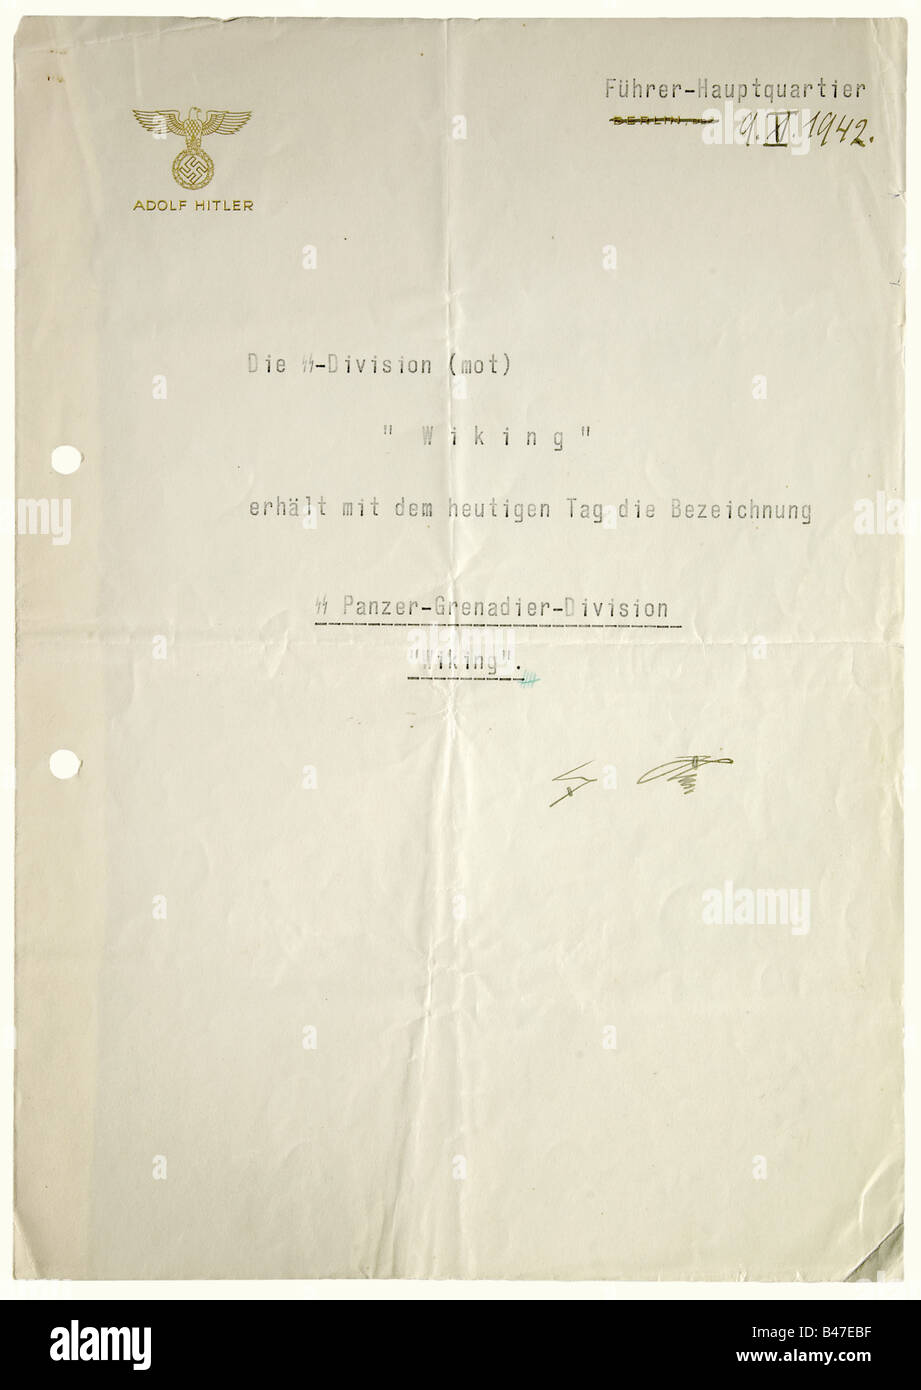 Adolf Hitler - the citation awarding the Name 'SS-Panzer Grenadier Division 'Wiking'', to the SS-Division (mot.) 'Wiking'. 'Führer Headquarters, 9 September 1942', autograph signature, 'Adolf Hitler', in ink. Sheet with gold stamped party eagle above 'Adolf Hitler', 'Berlin, den' crossed out and replaced by the typed 'Führer Headquarters'. The text in large letters: 'As of today, the SS-Division (mot) 'Wiking' is granted the name 'SS-Panzer Grenadier Division 'Wiking''. Heinrich Himmler's initials 'HH' in green copy pencil are at the end of the text above Adolf, Stock Photo